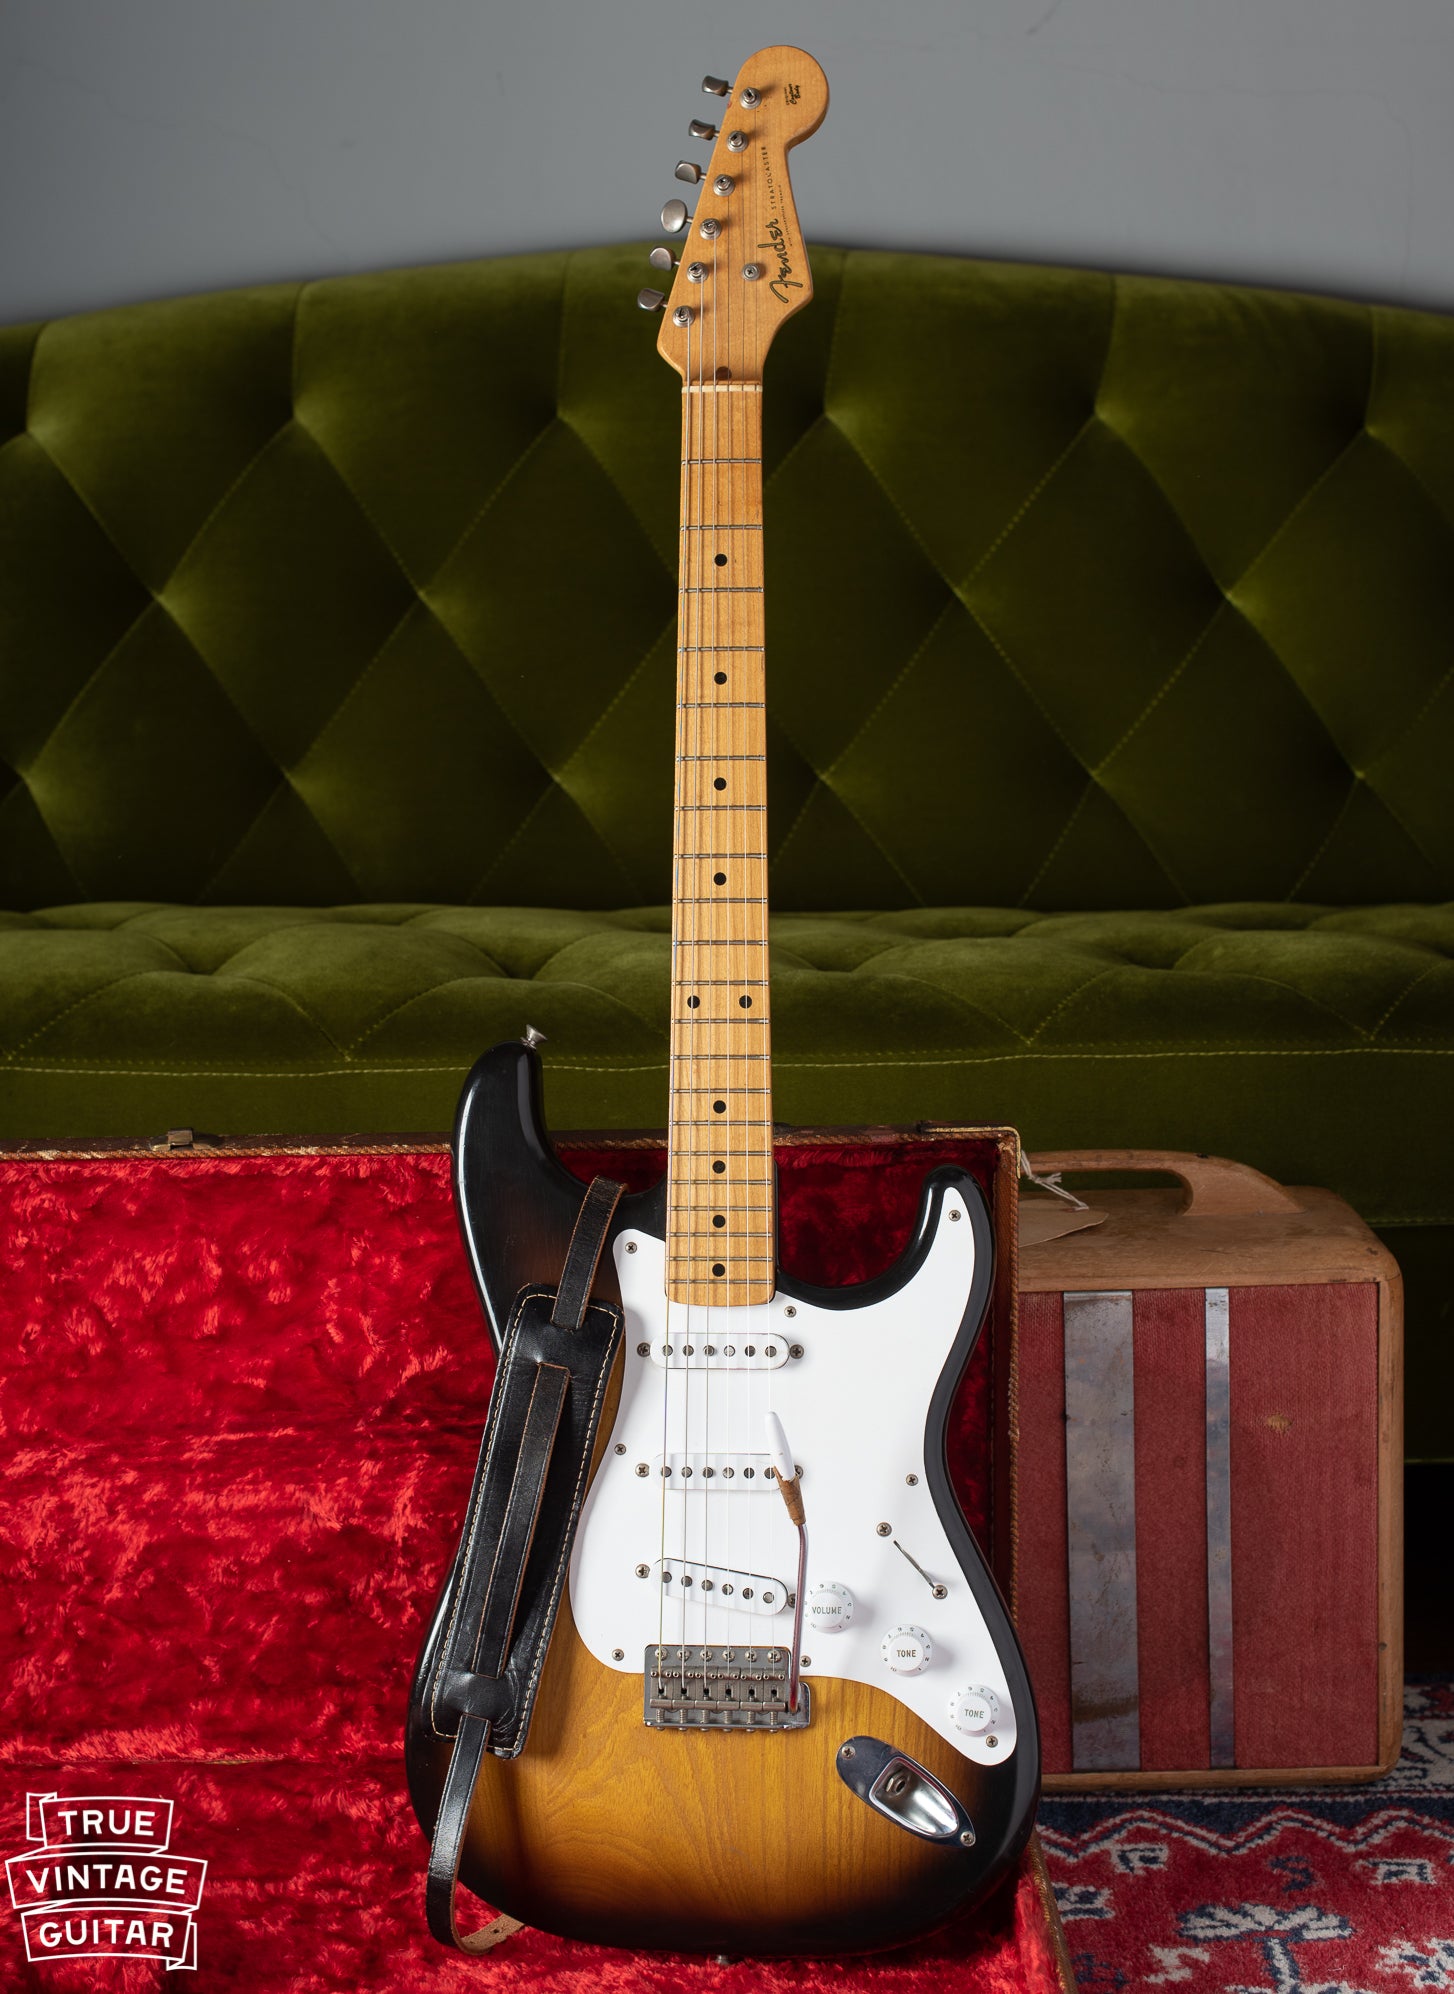 Fender Stratocaster 1954 with Maple neck and Ash body, original leather strap, in center pocket case